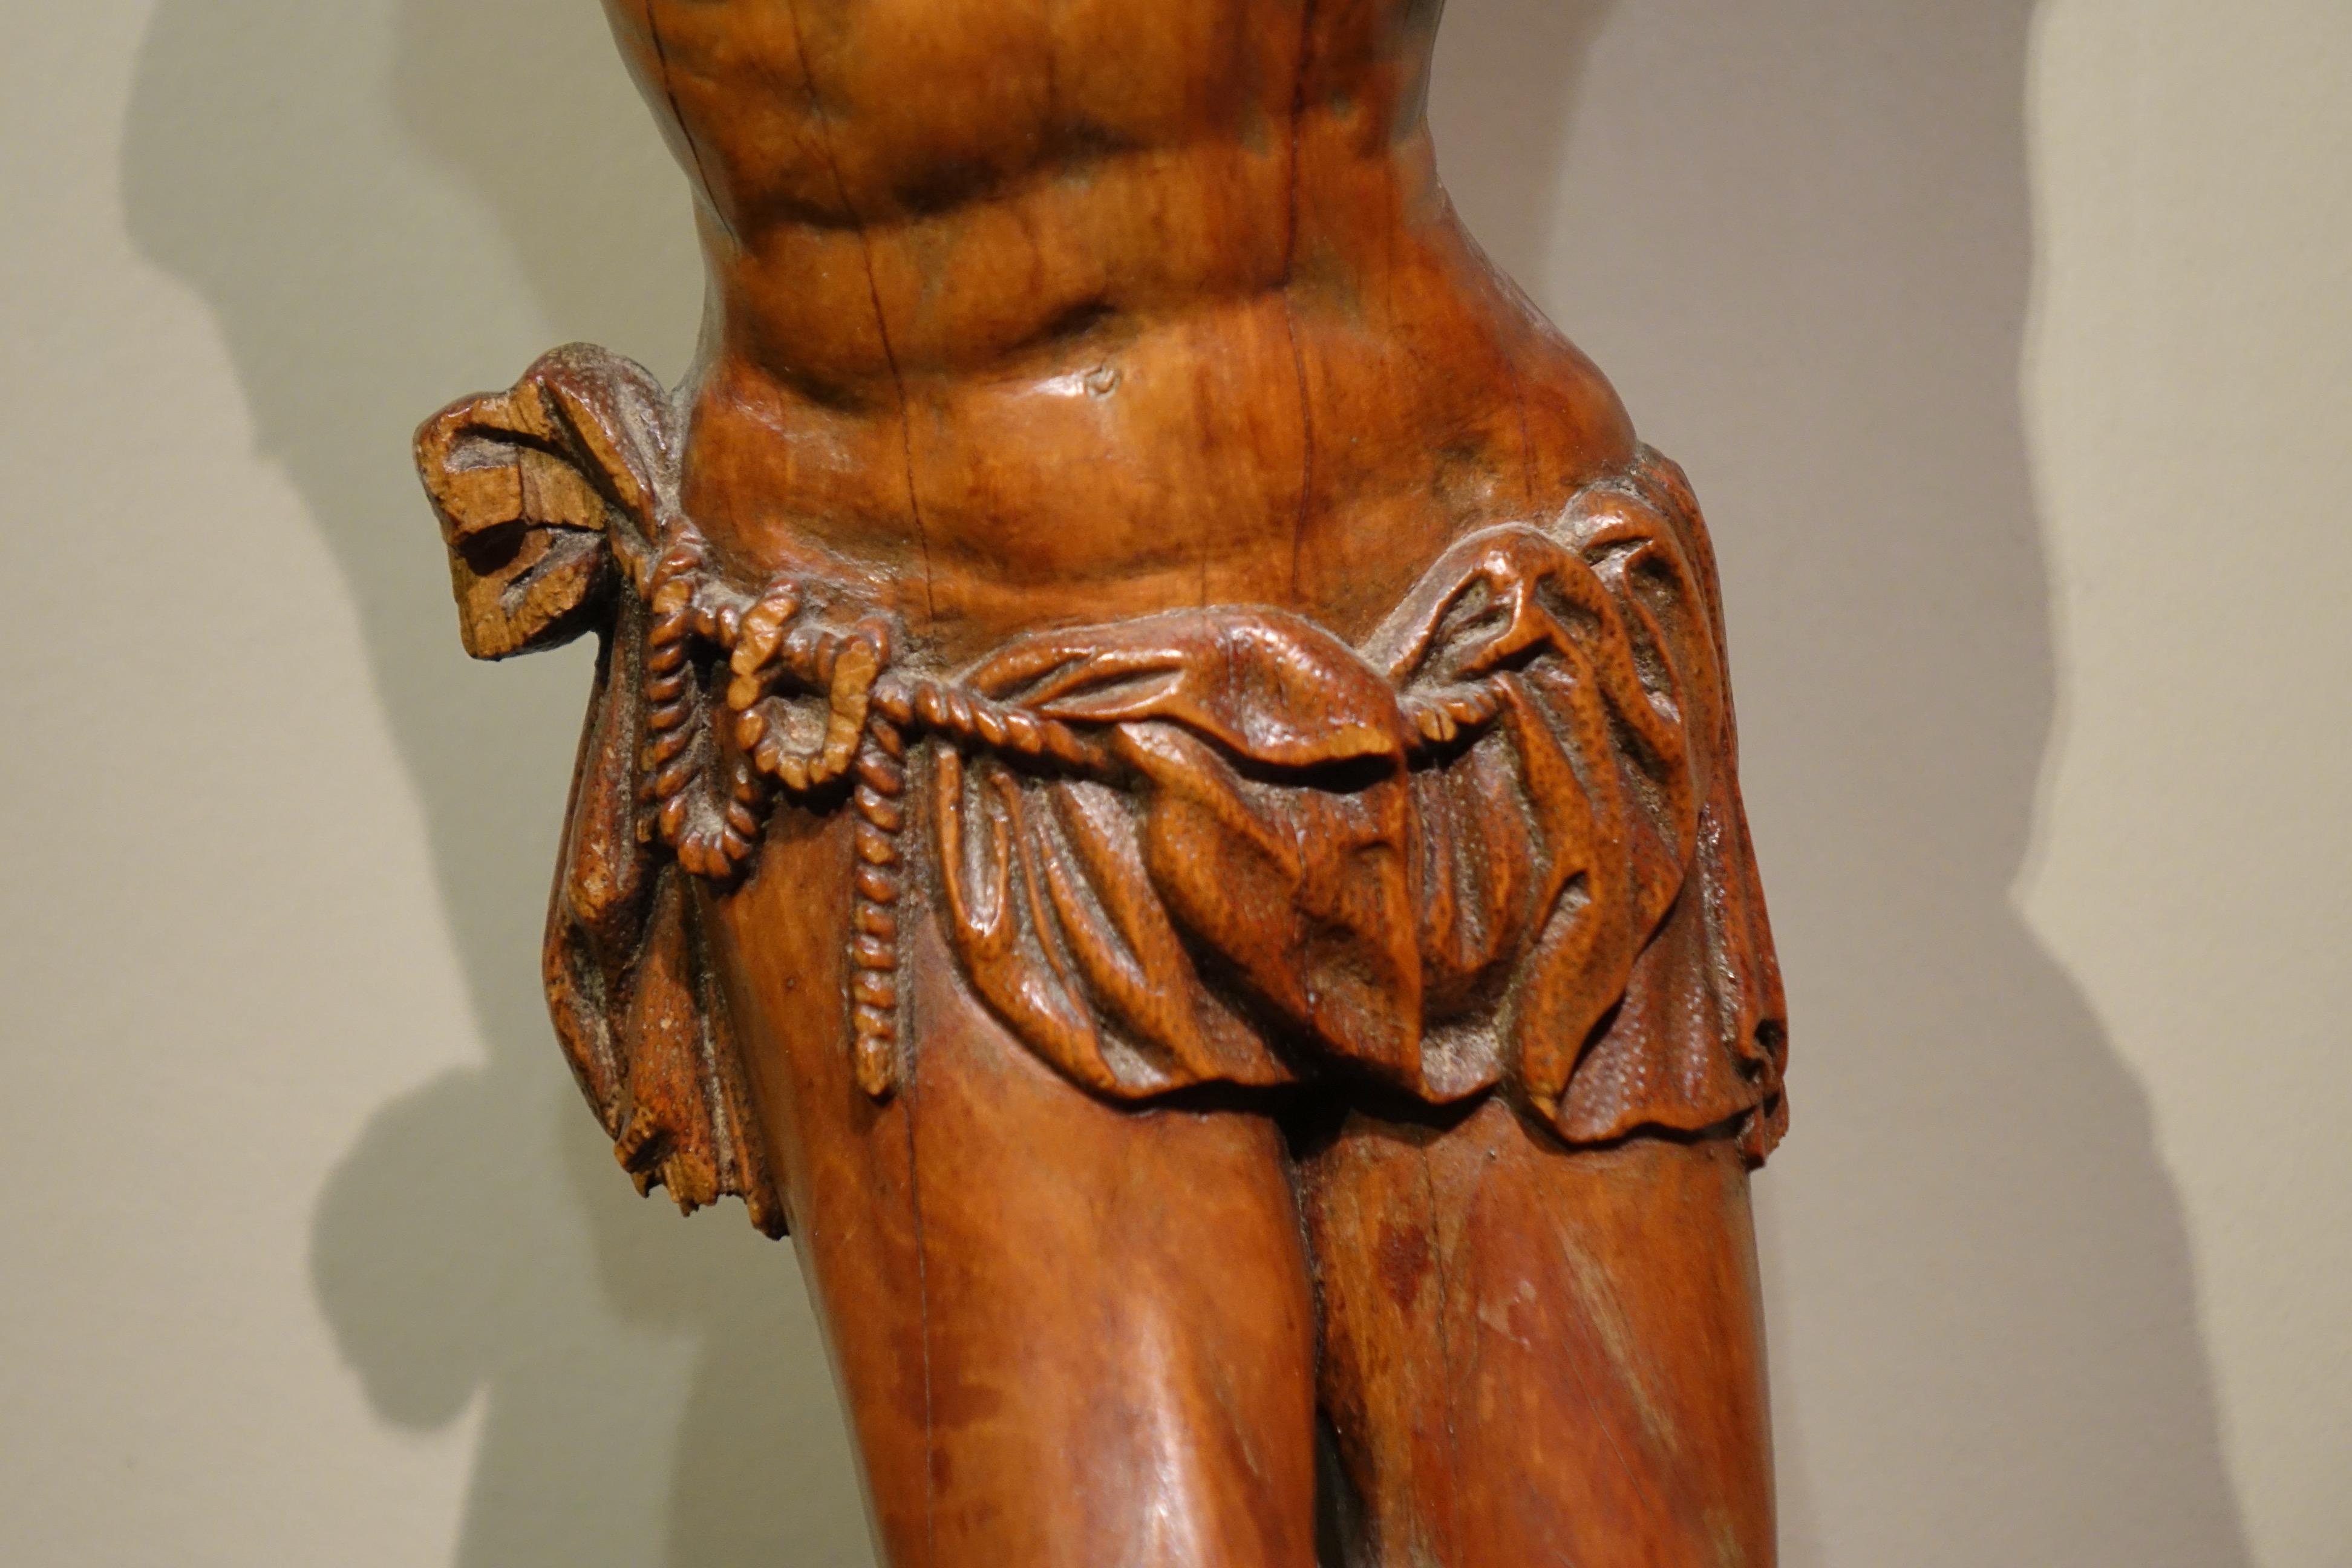 Renaissance Christ in Boxwood, France, late 16th-early 17th century